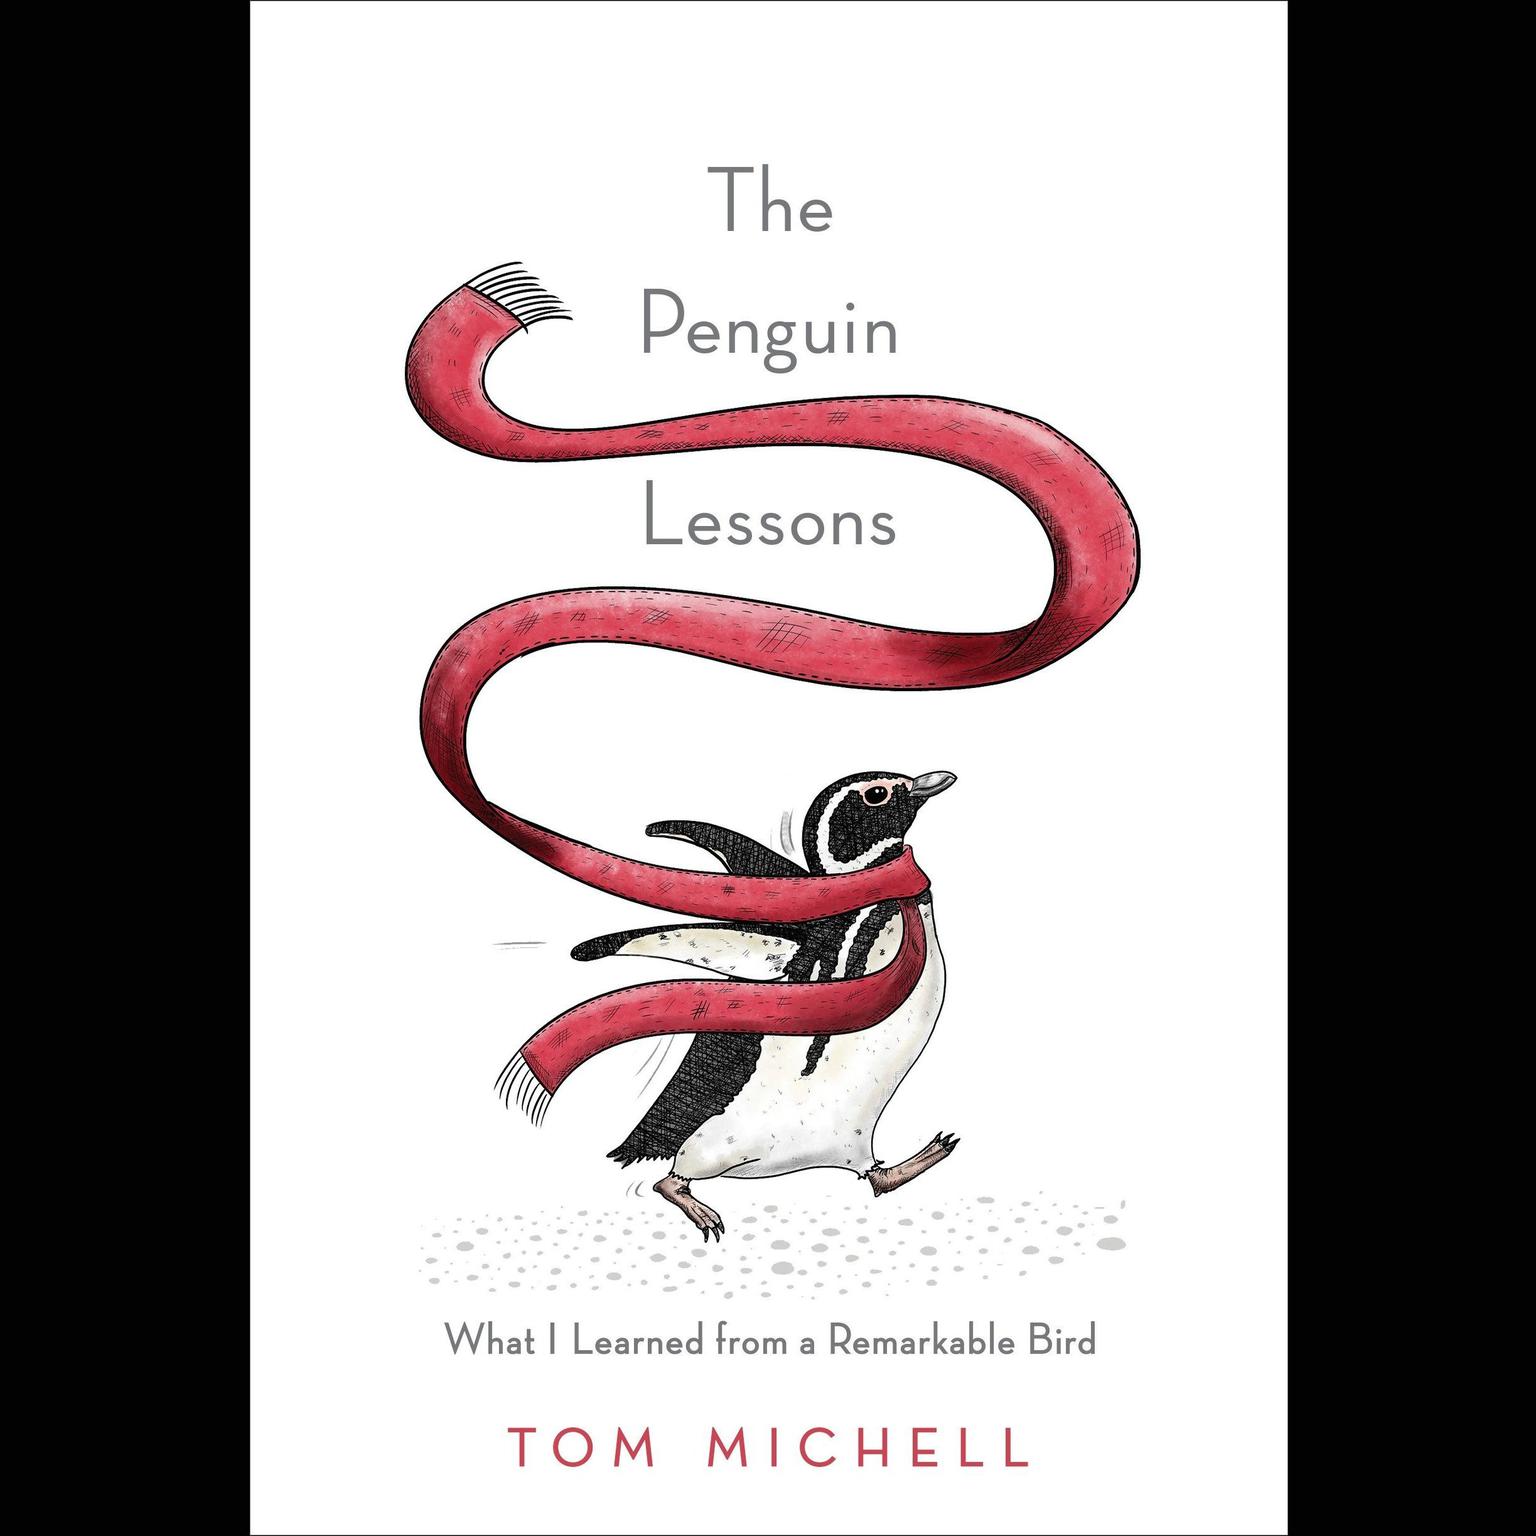 The Penguin Lessons Audiobook Listen Instantly